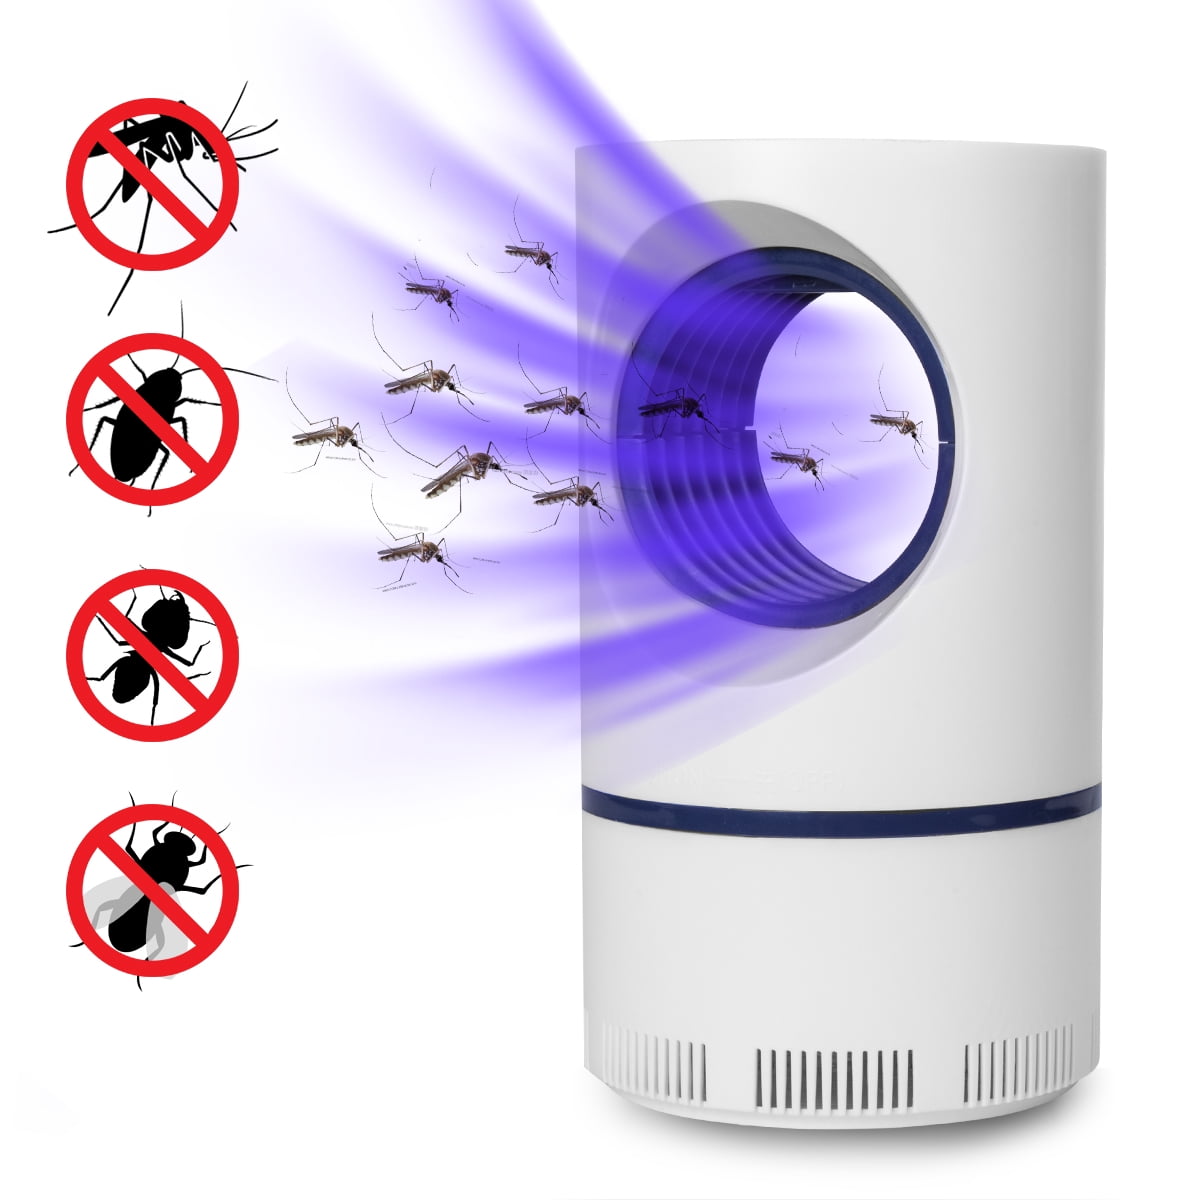 LED Electric UV Mosquito Killer Lamp Fly Bug Insect Repellent Zapper Trap HOT 